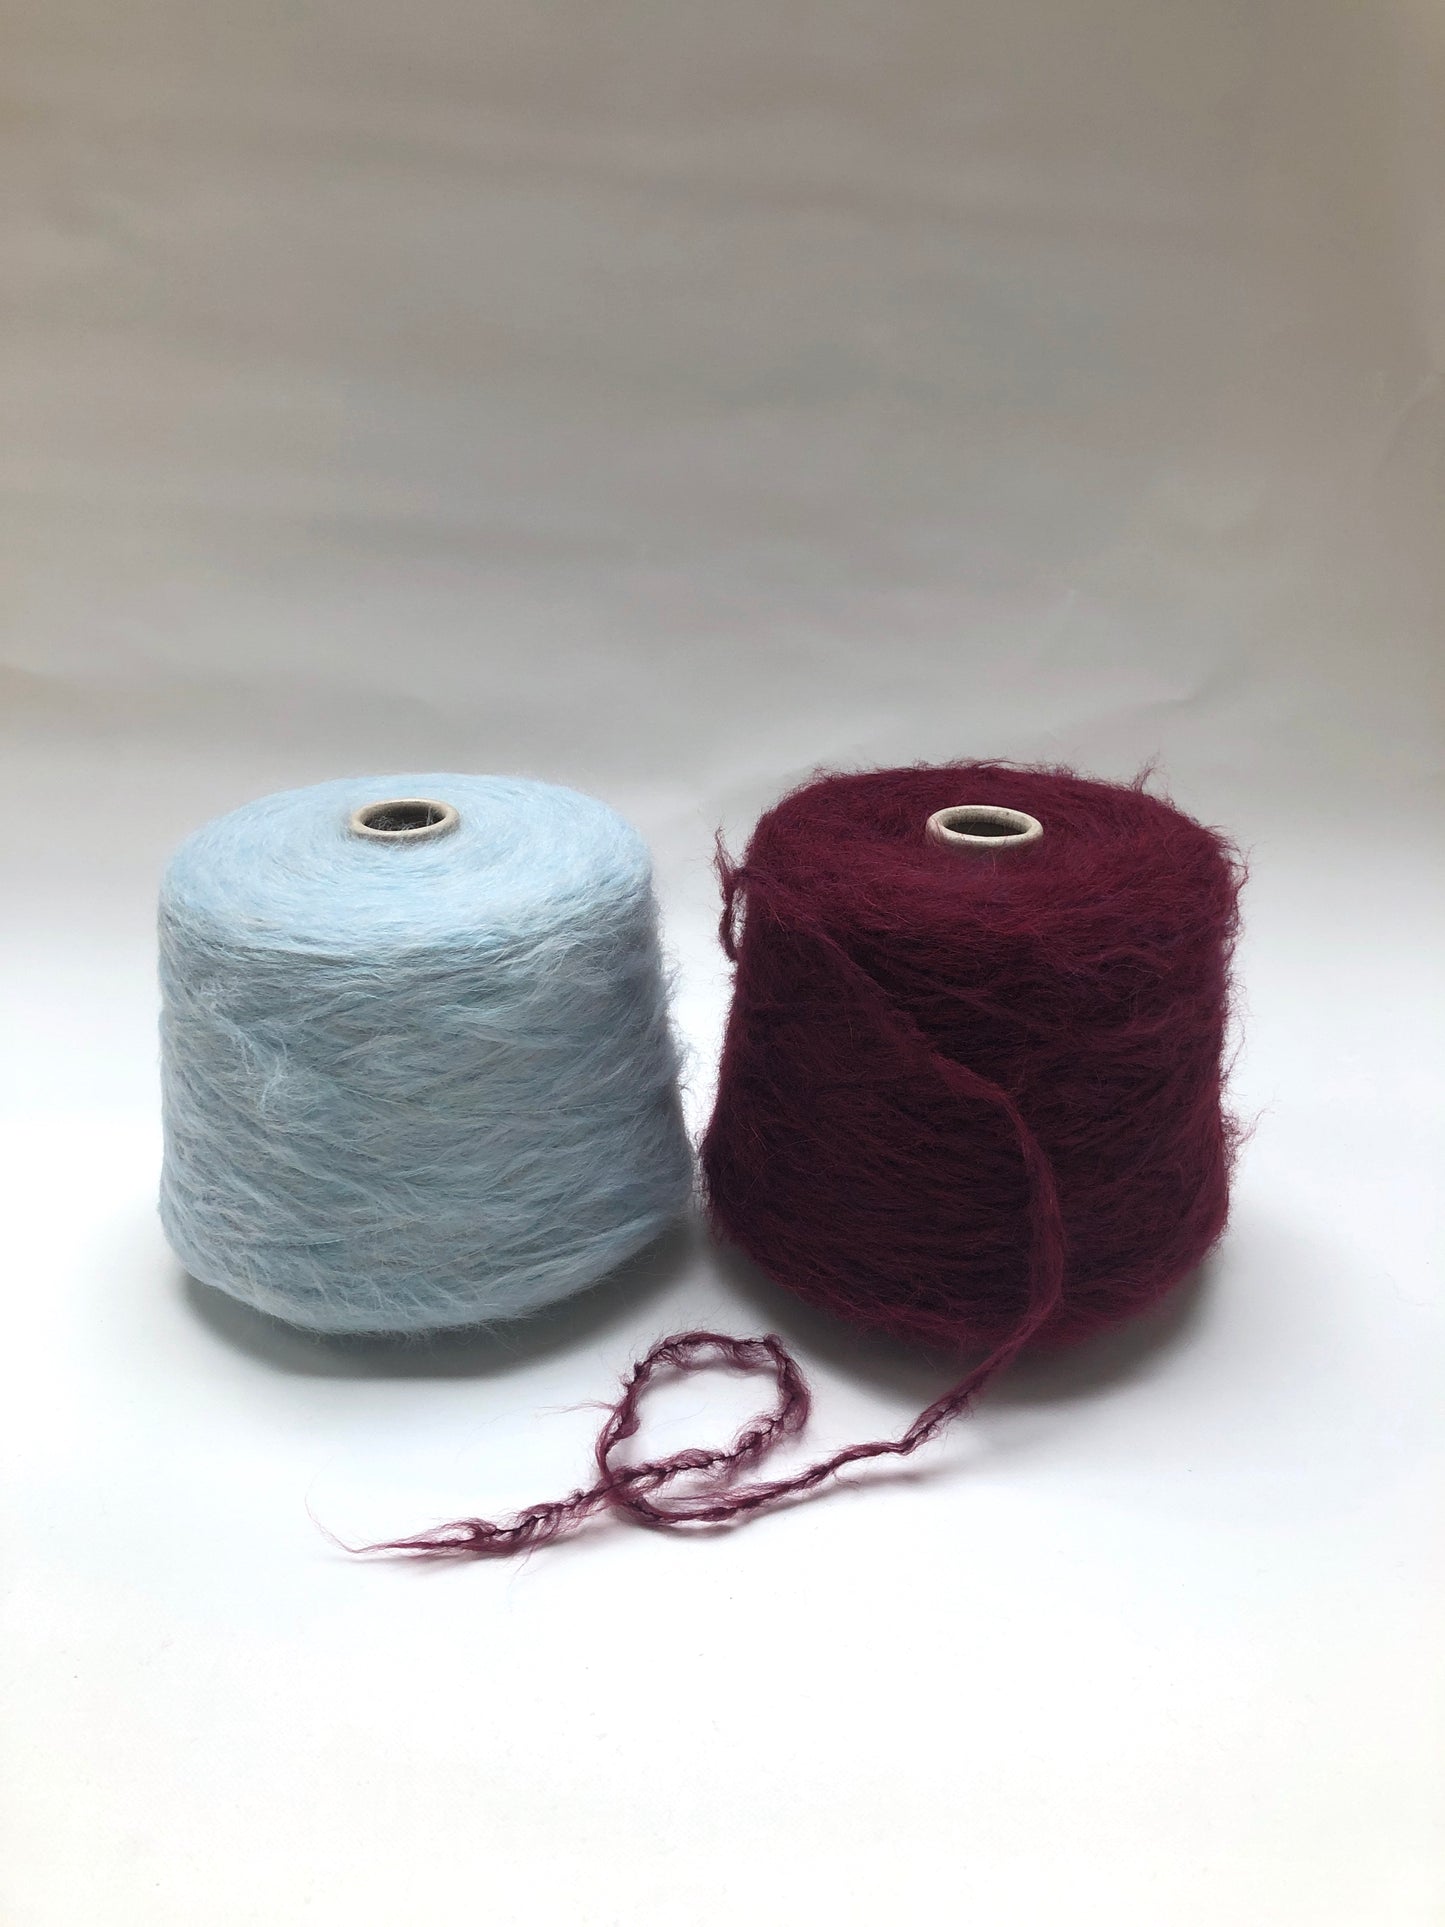 Yarn Cones, Blue and Bordeaux, NM 1/2200